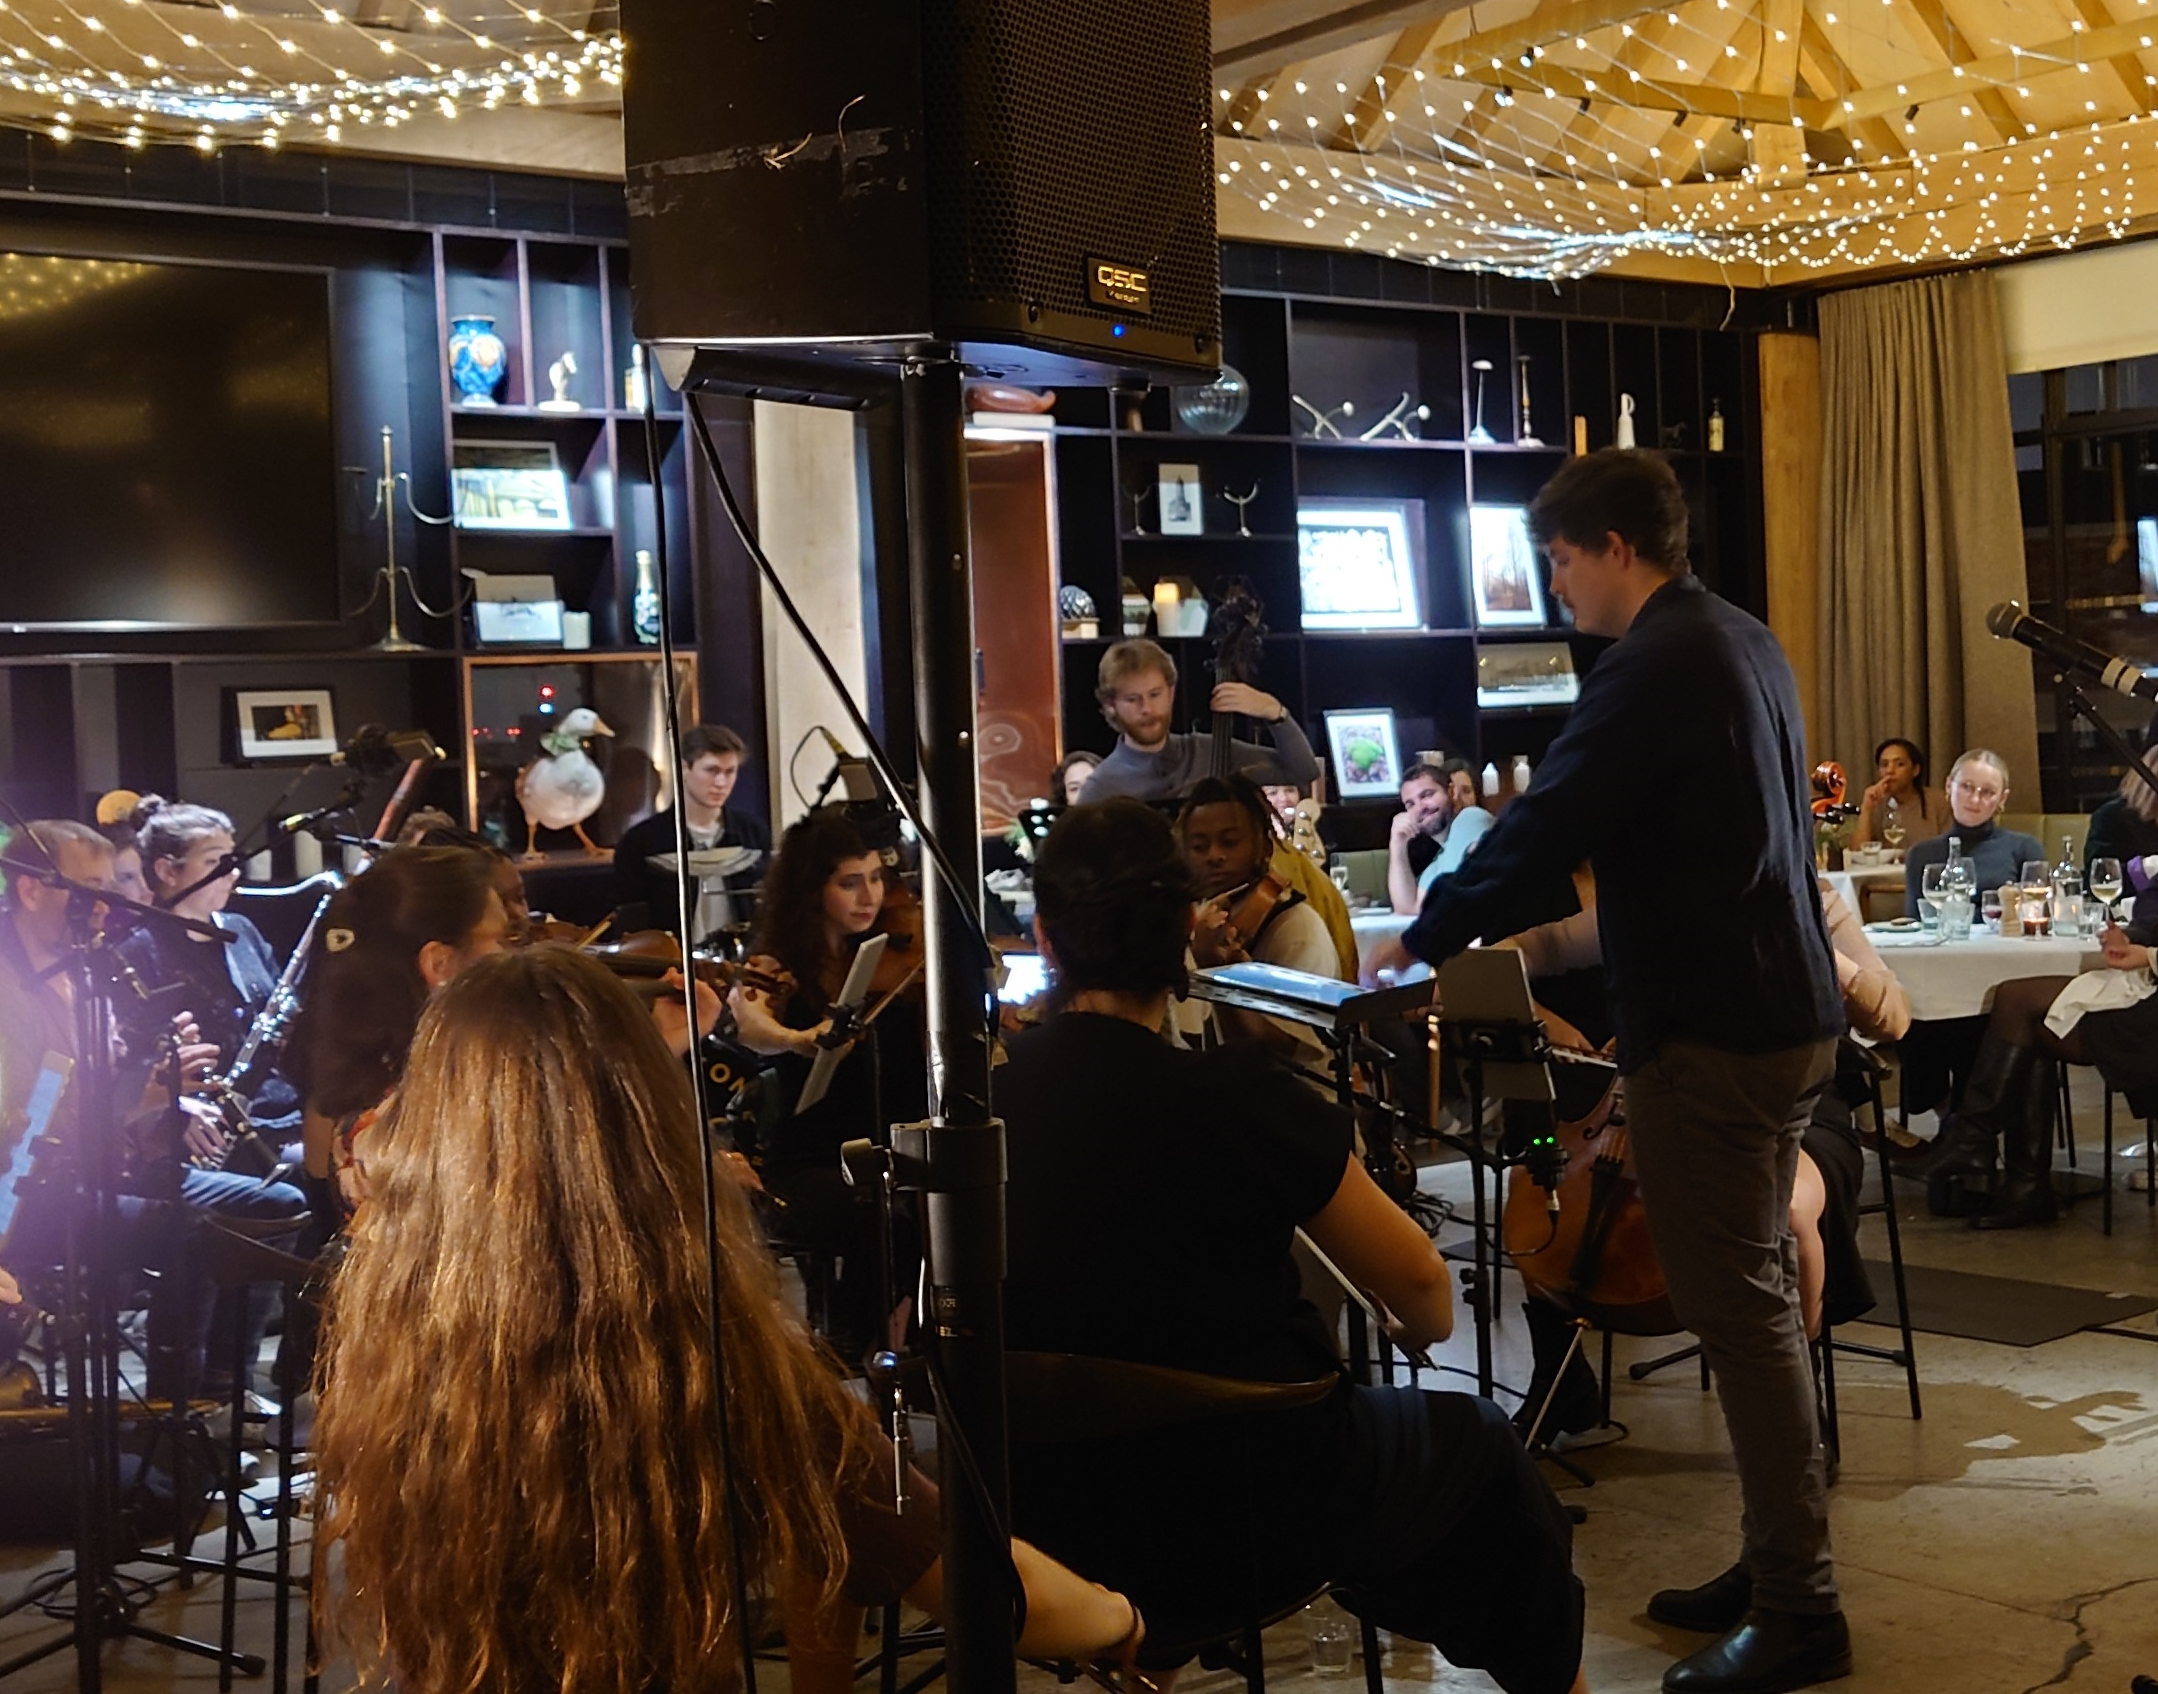 Matthew O'Keeffe & Brixton Chamber Orchestra at Upstairs at the Department Store